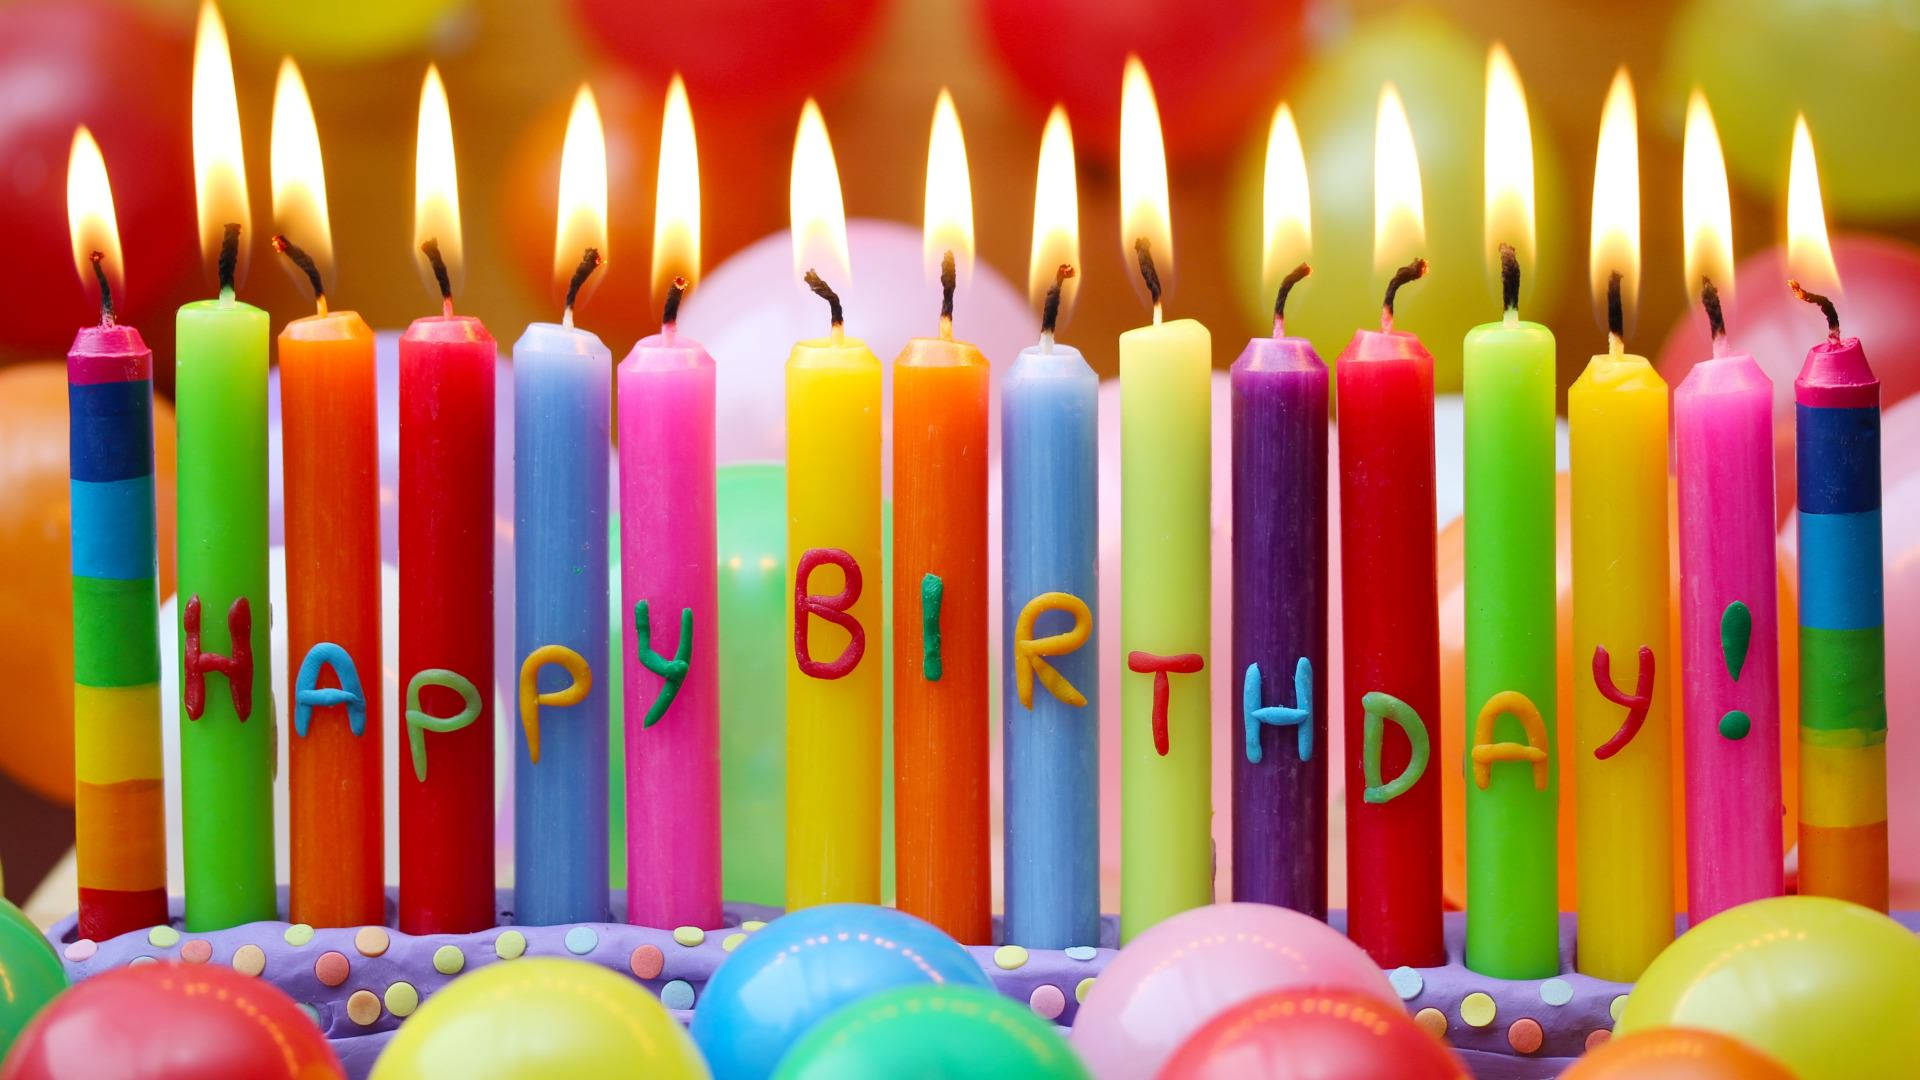 It's My Birthday Colorful Candles Background